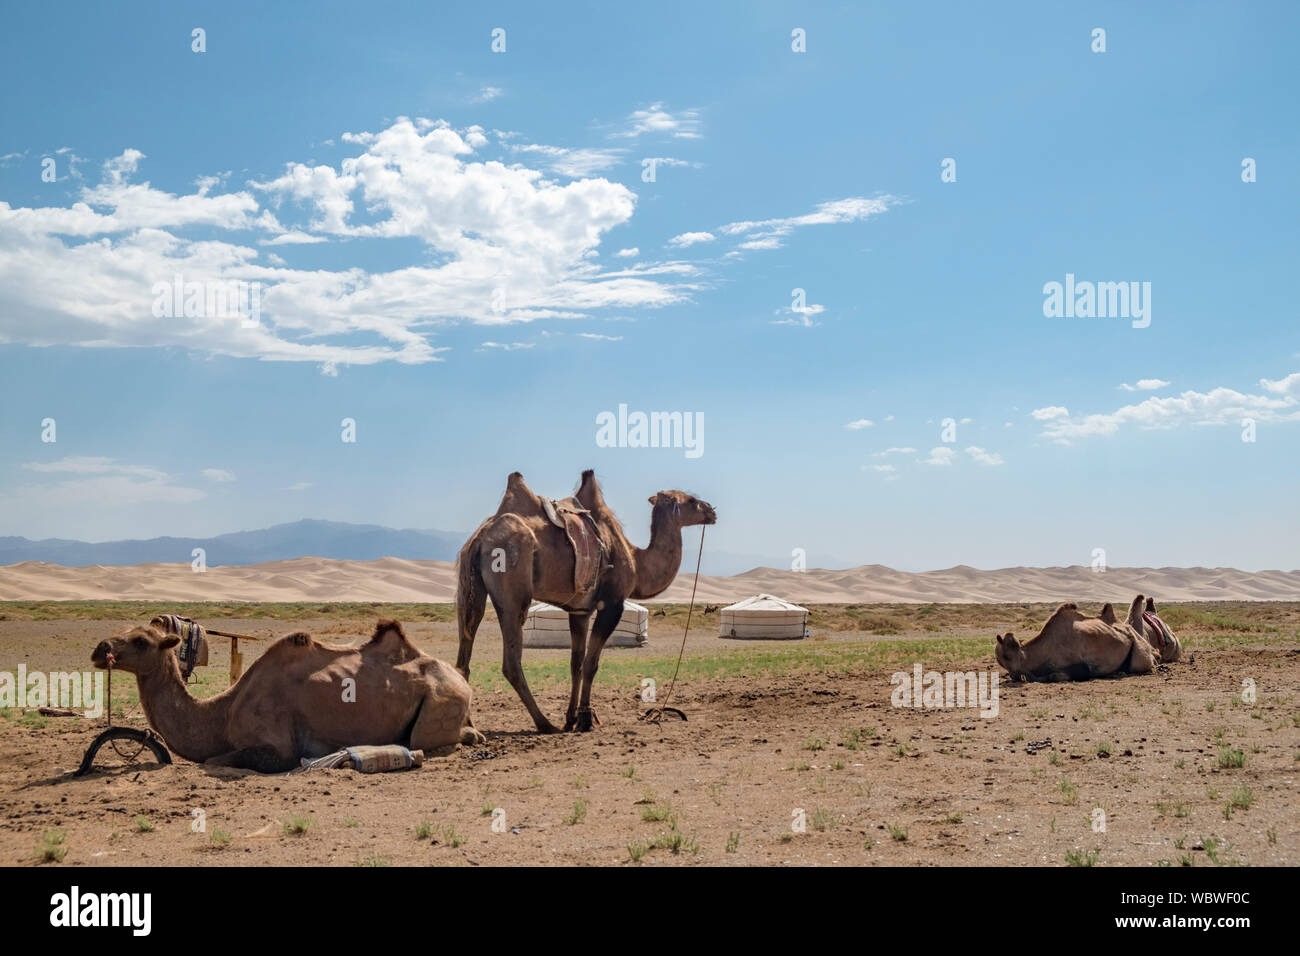 The Bactrian camel is a native to the steppes of Central Asia. In contrast to the single-humped dromedary camel, the Bactrian camel has two humps on i Stock Photo